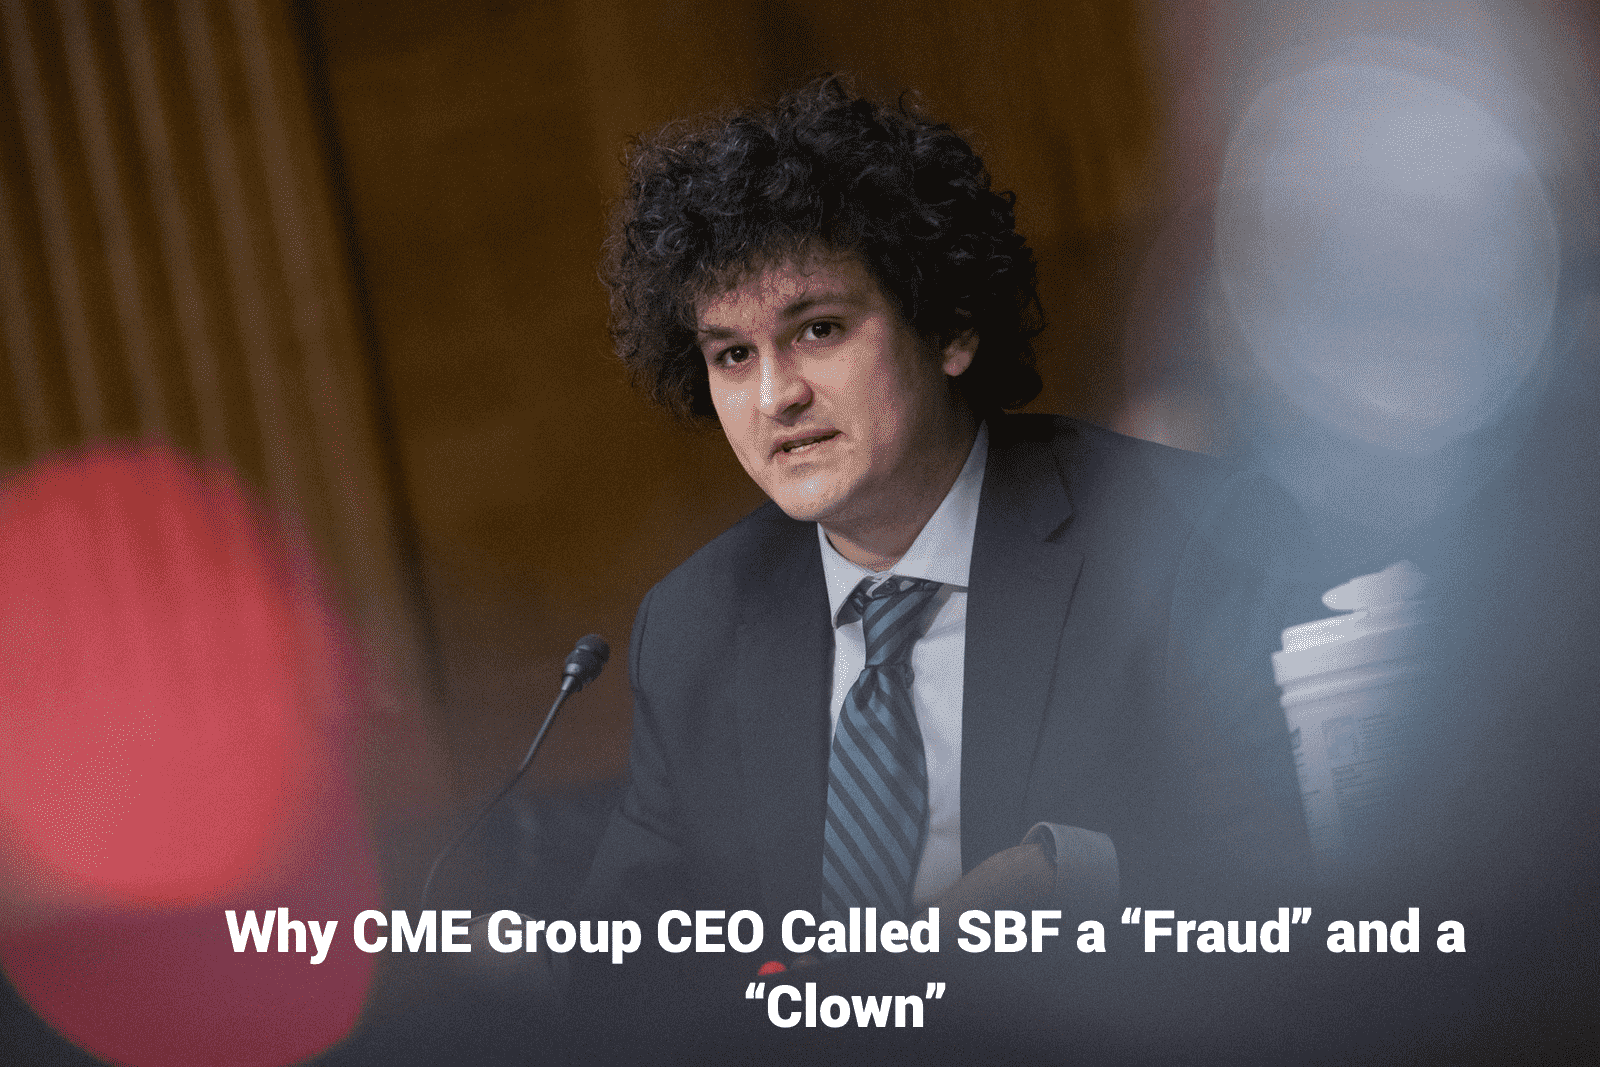 When CME Group CEO Called SBF a “Fraud” and a “Clown”